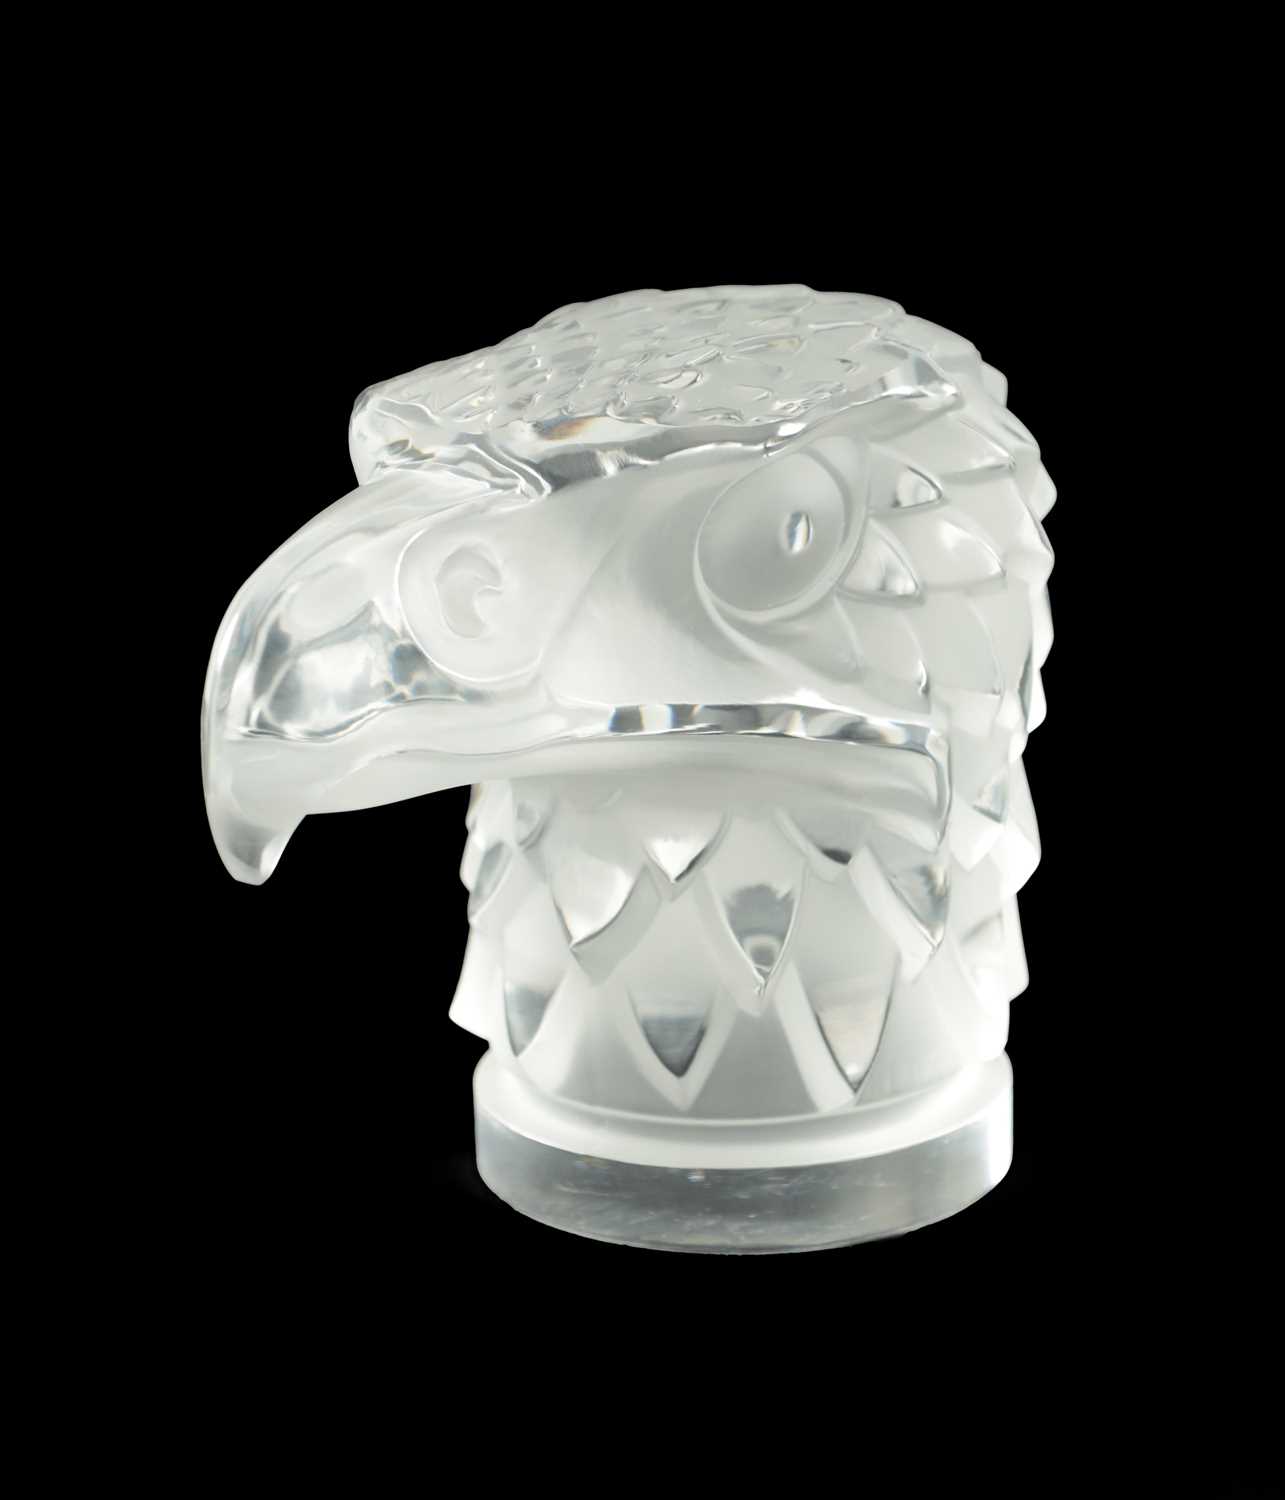 A RENE LALIQUE 'TETE D'AIGLE' CLEAR AND FROSTED GLASS CAR MASCOT